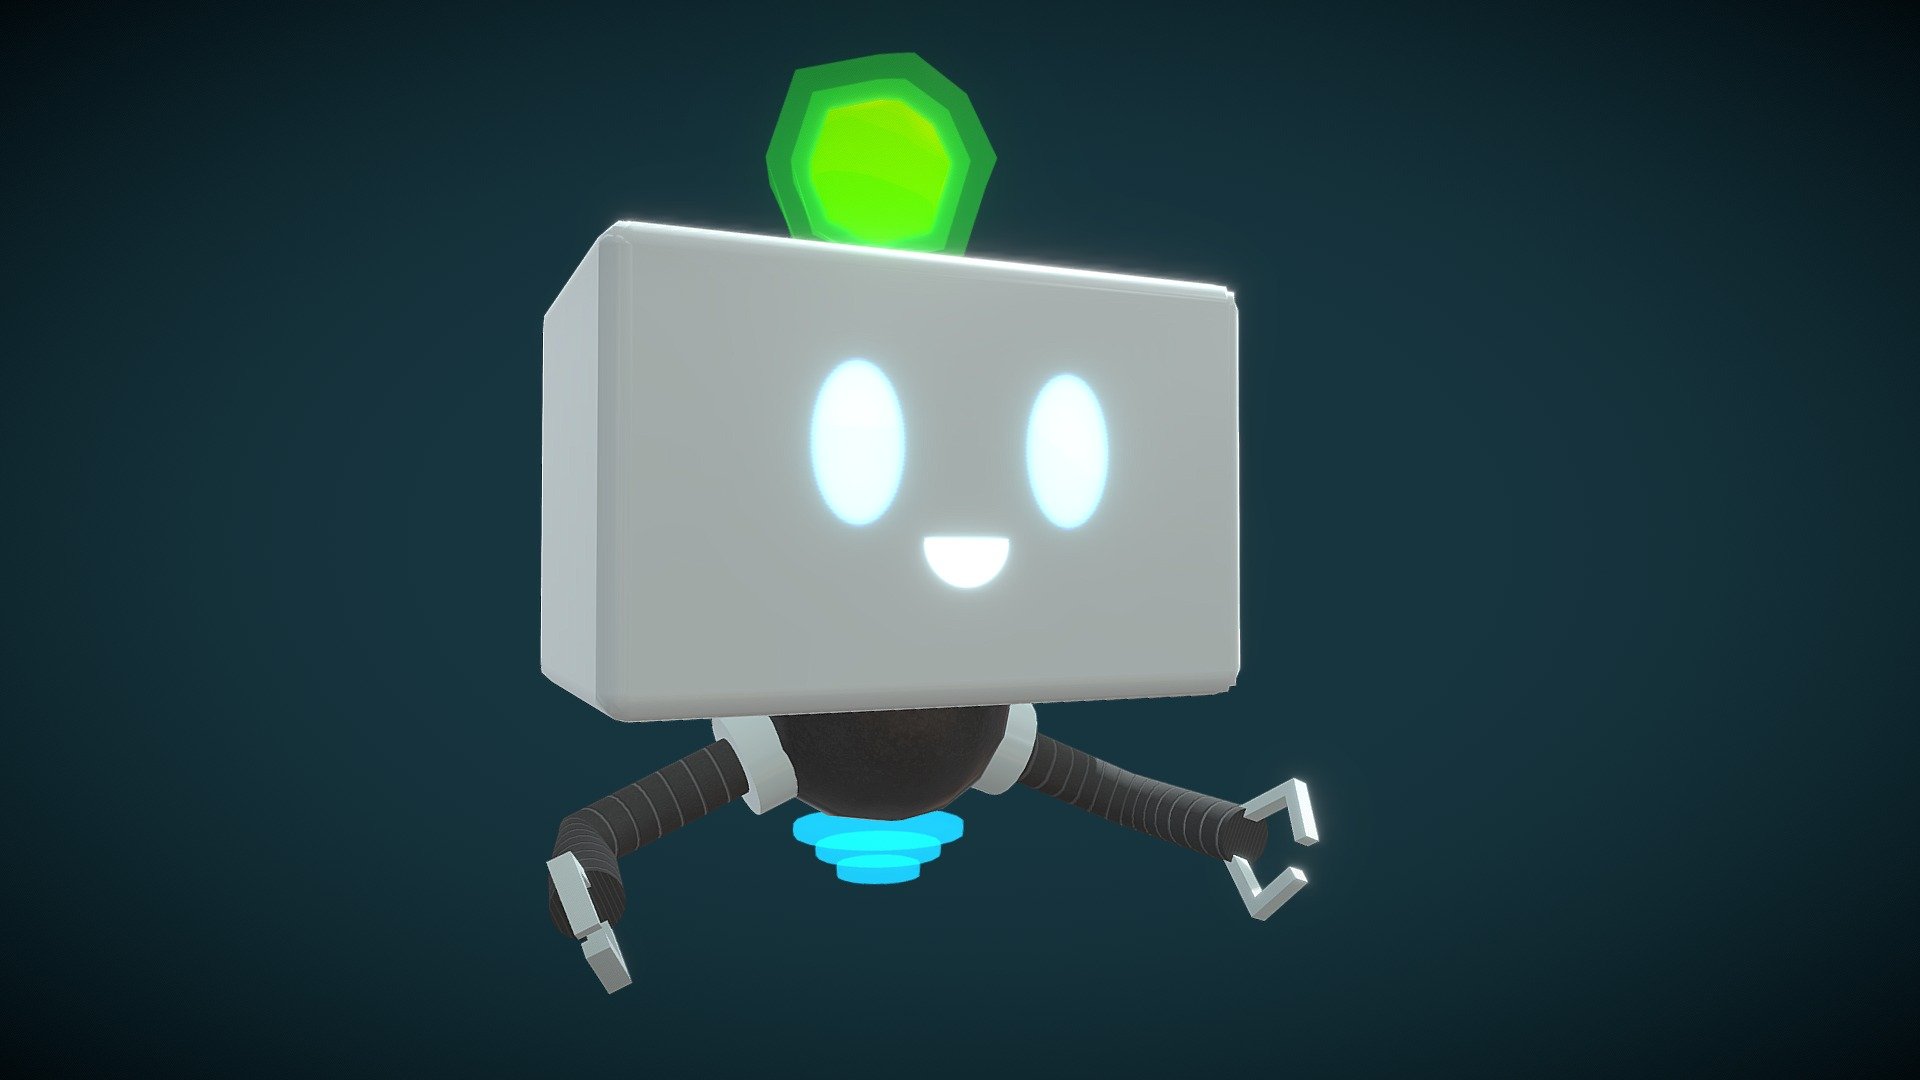 Flying Robot is a low-poly 3d model ready for Virtual Reality (VR), Augmented Reality (AR), games and other real-time apps.

In case of any issues let me know, hope you like it :)

Thanks for all the support so far!

HDaniel 3d model